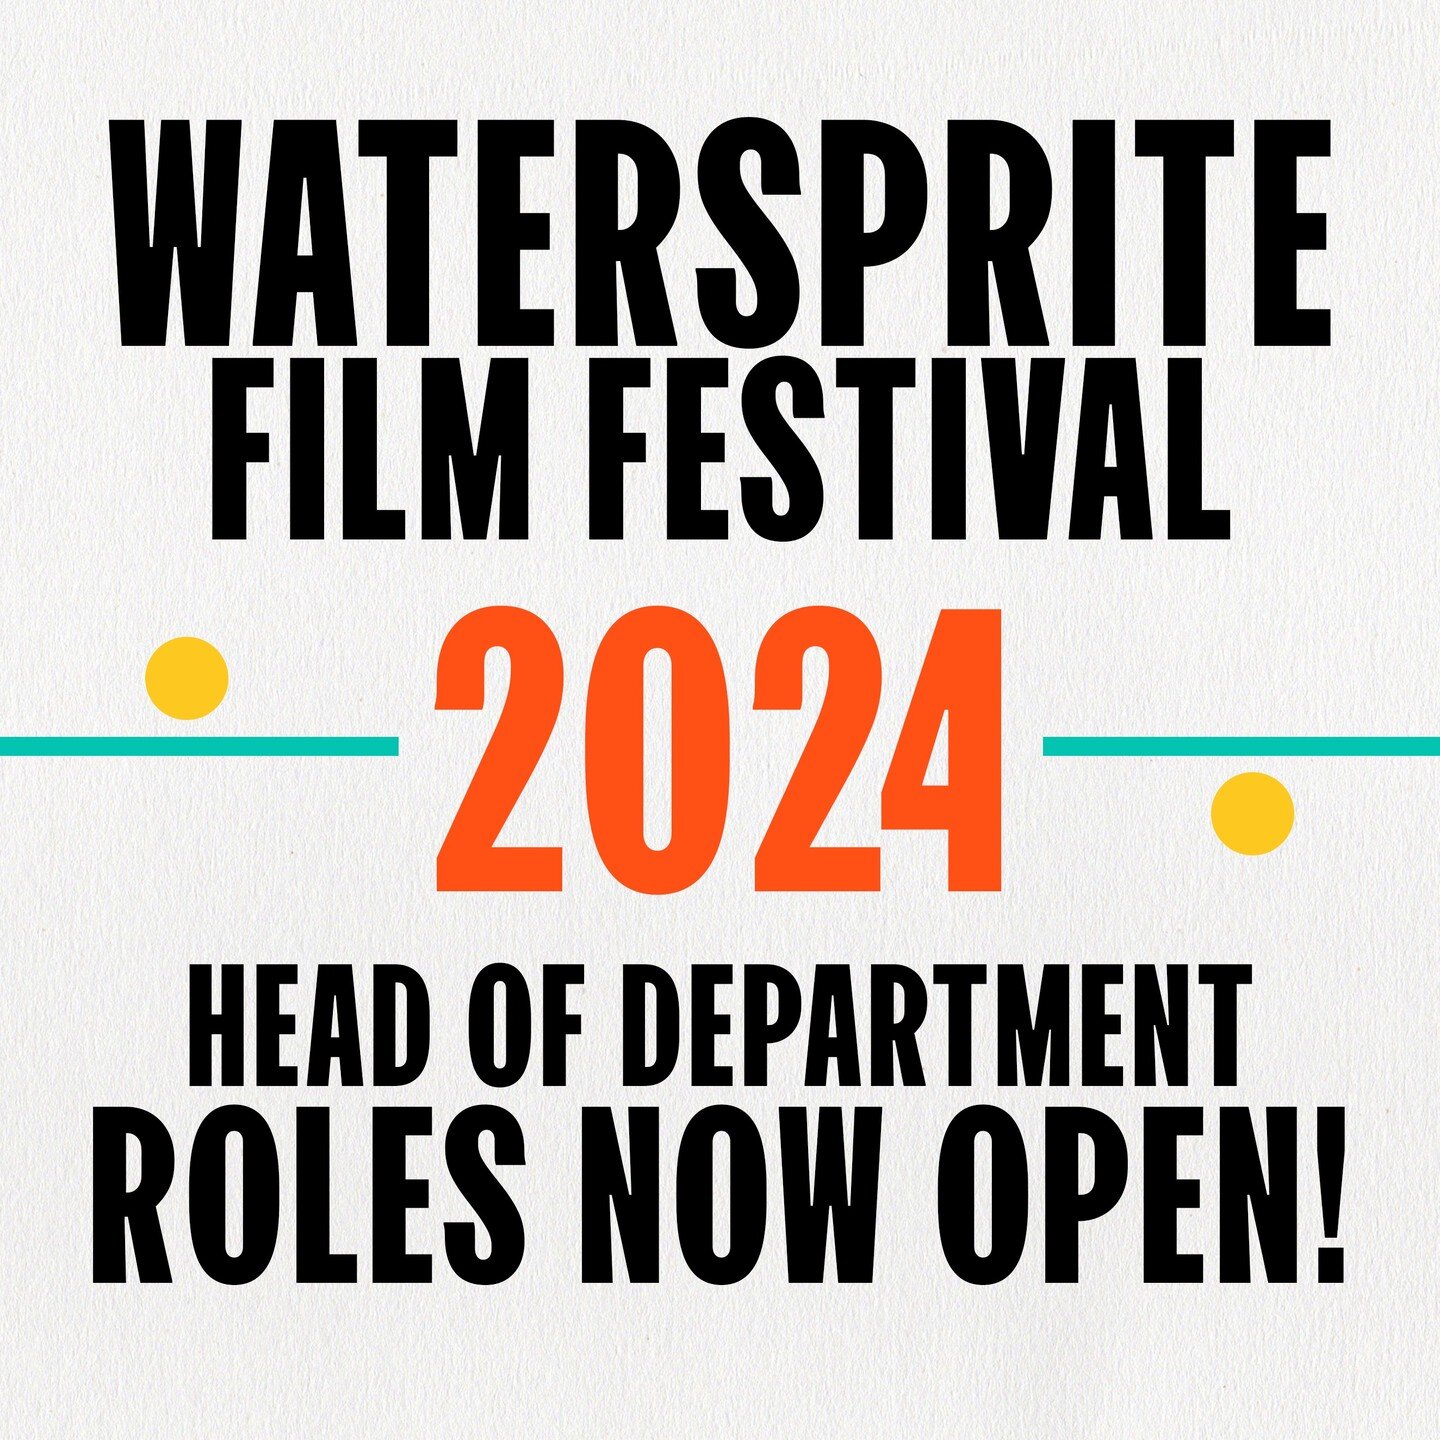 Want to join the team behind one of the largest international student film festivals in the world? We are currently recruiting our Heads of Department, the students from Anglia Ruskin and Cambridge University who will lead each core aspect of the fes